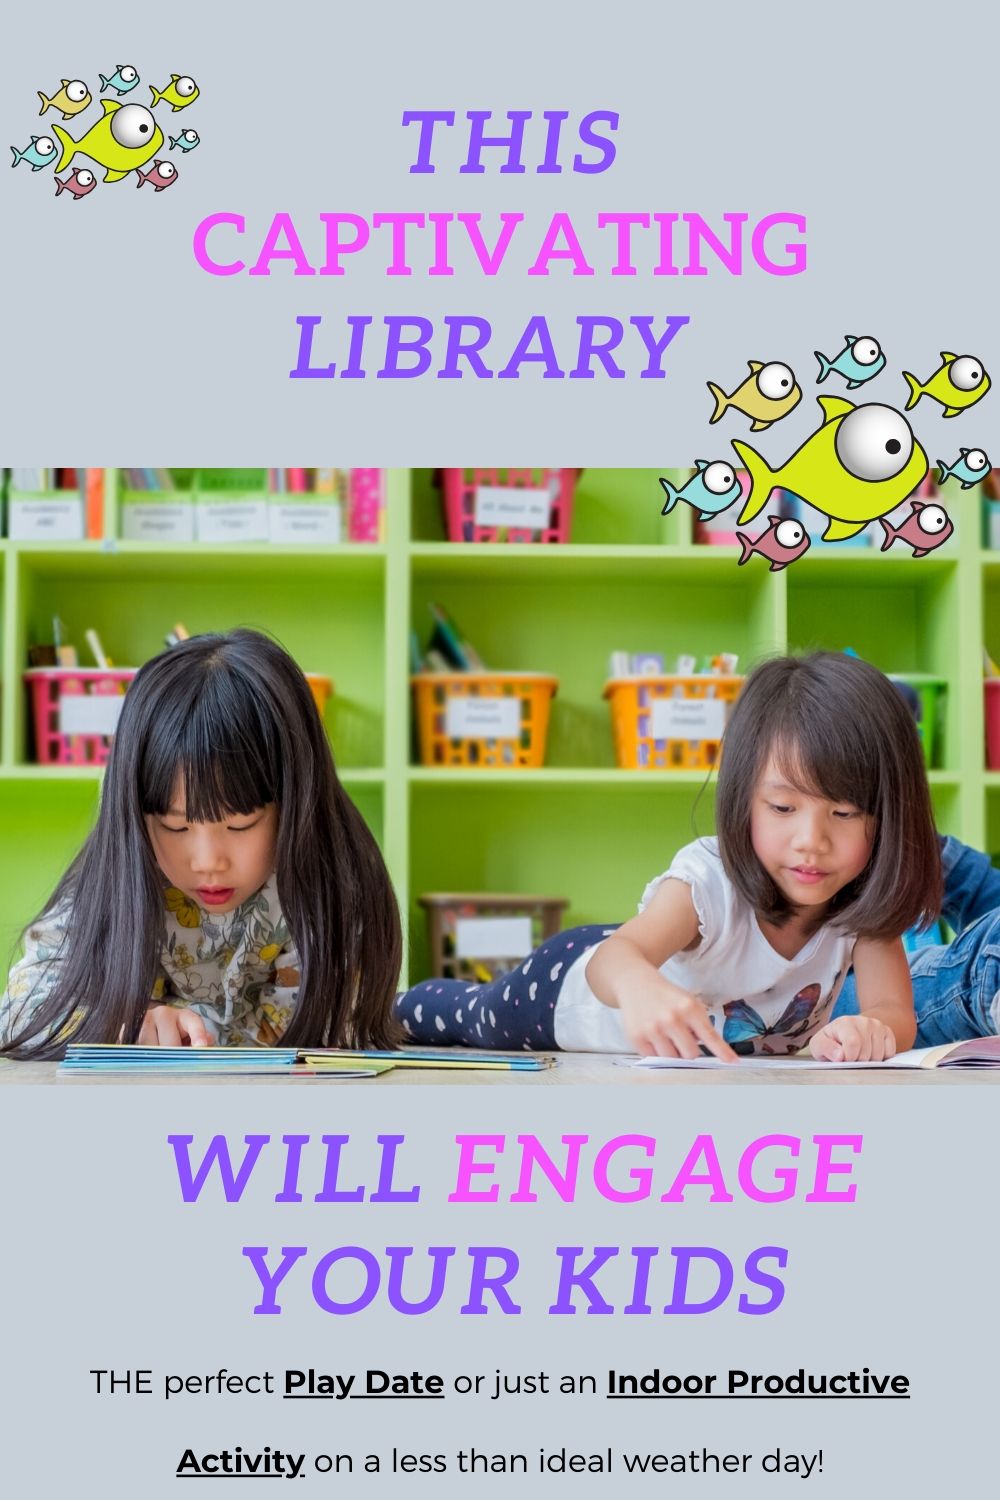 Engaging Library for all kids